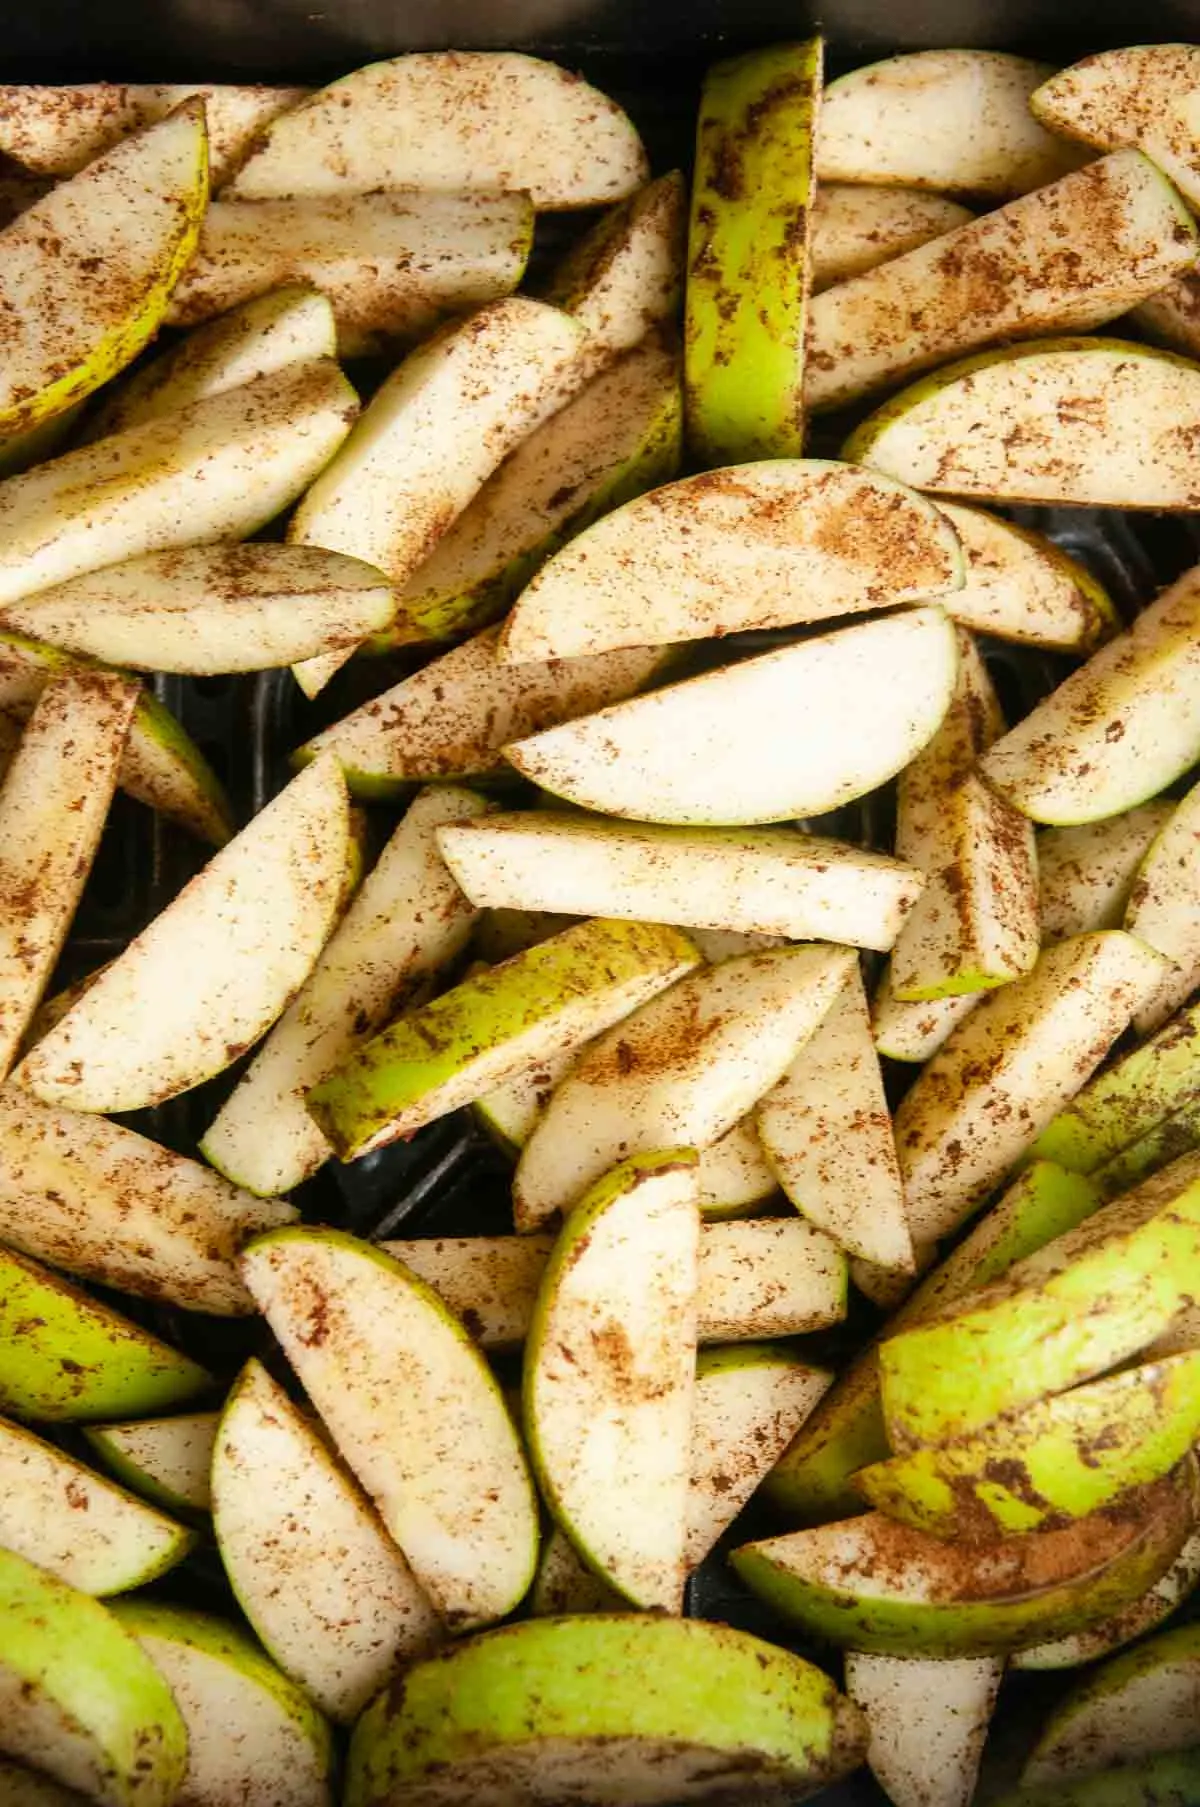 Spread the apples out in the basket of the air fryer.